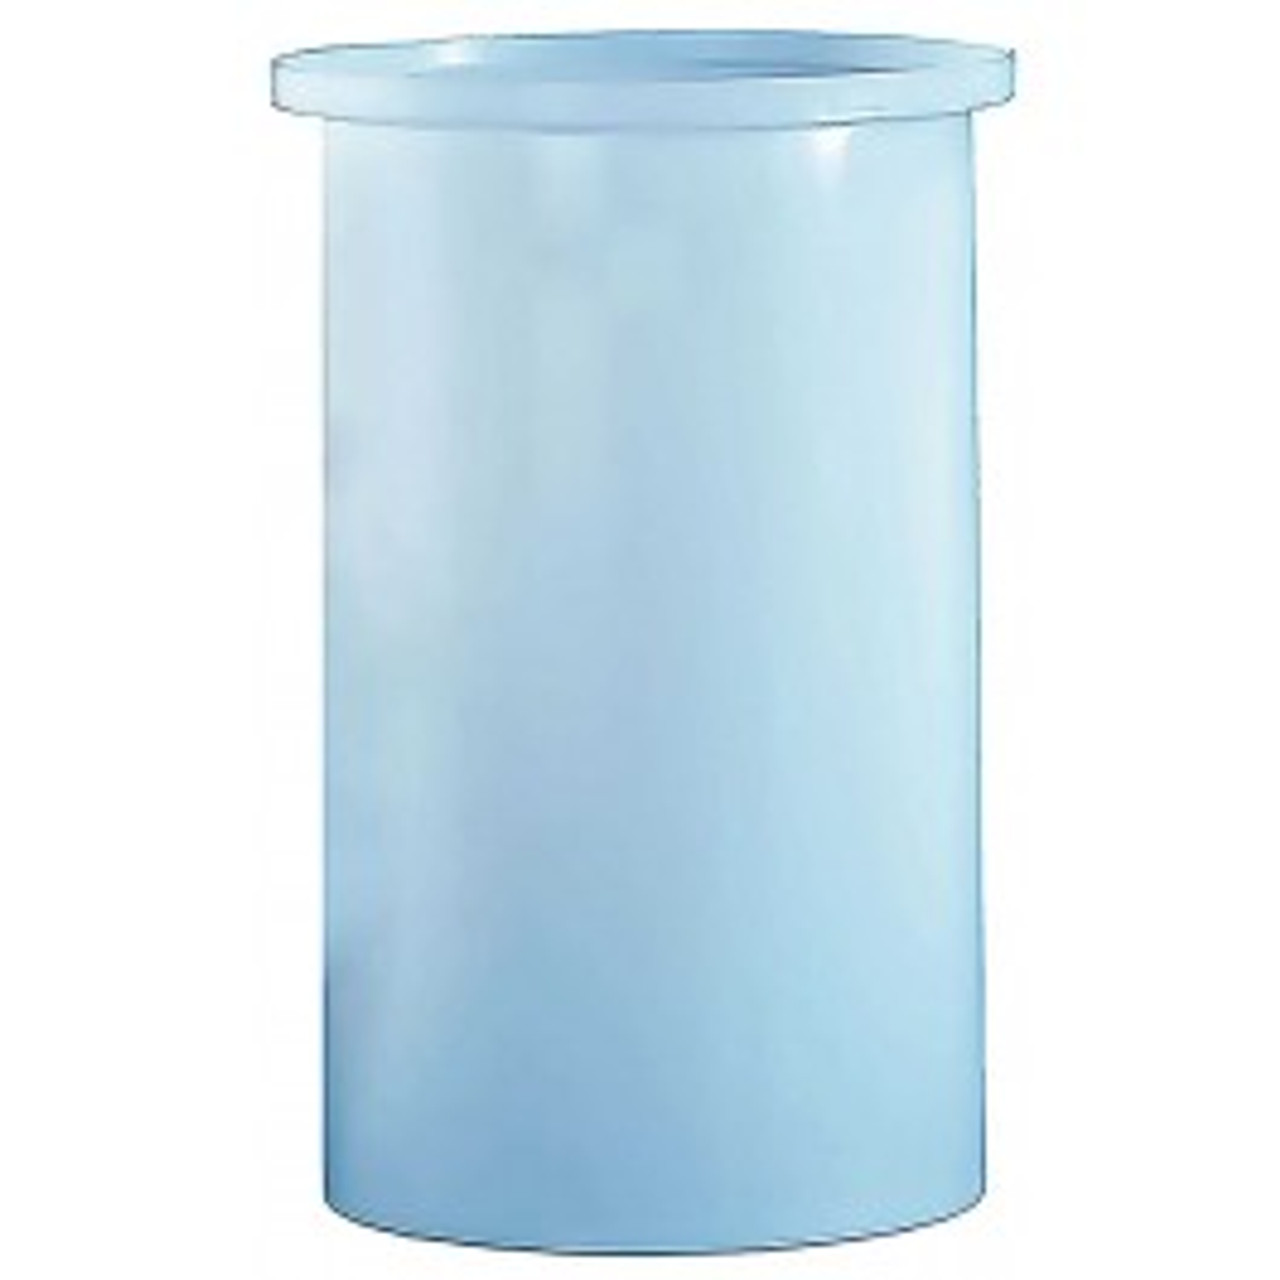 An image of a 55 Gallon PE Chem-Tainer White Cylindrical Open Top Tank | TC2236AA